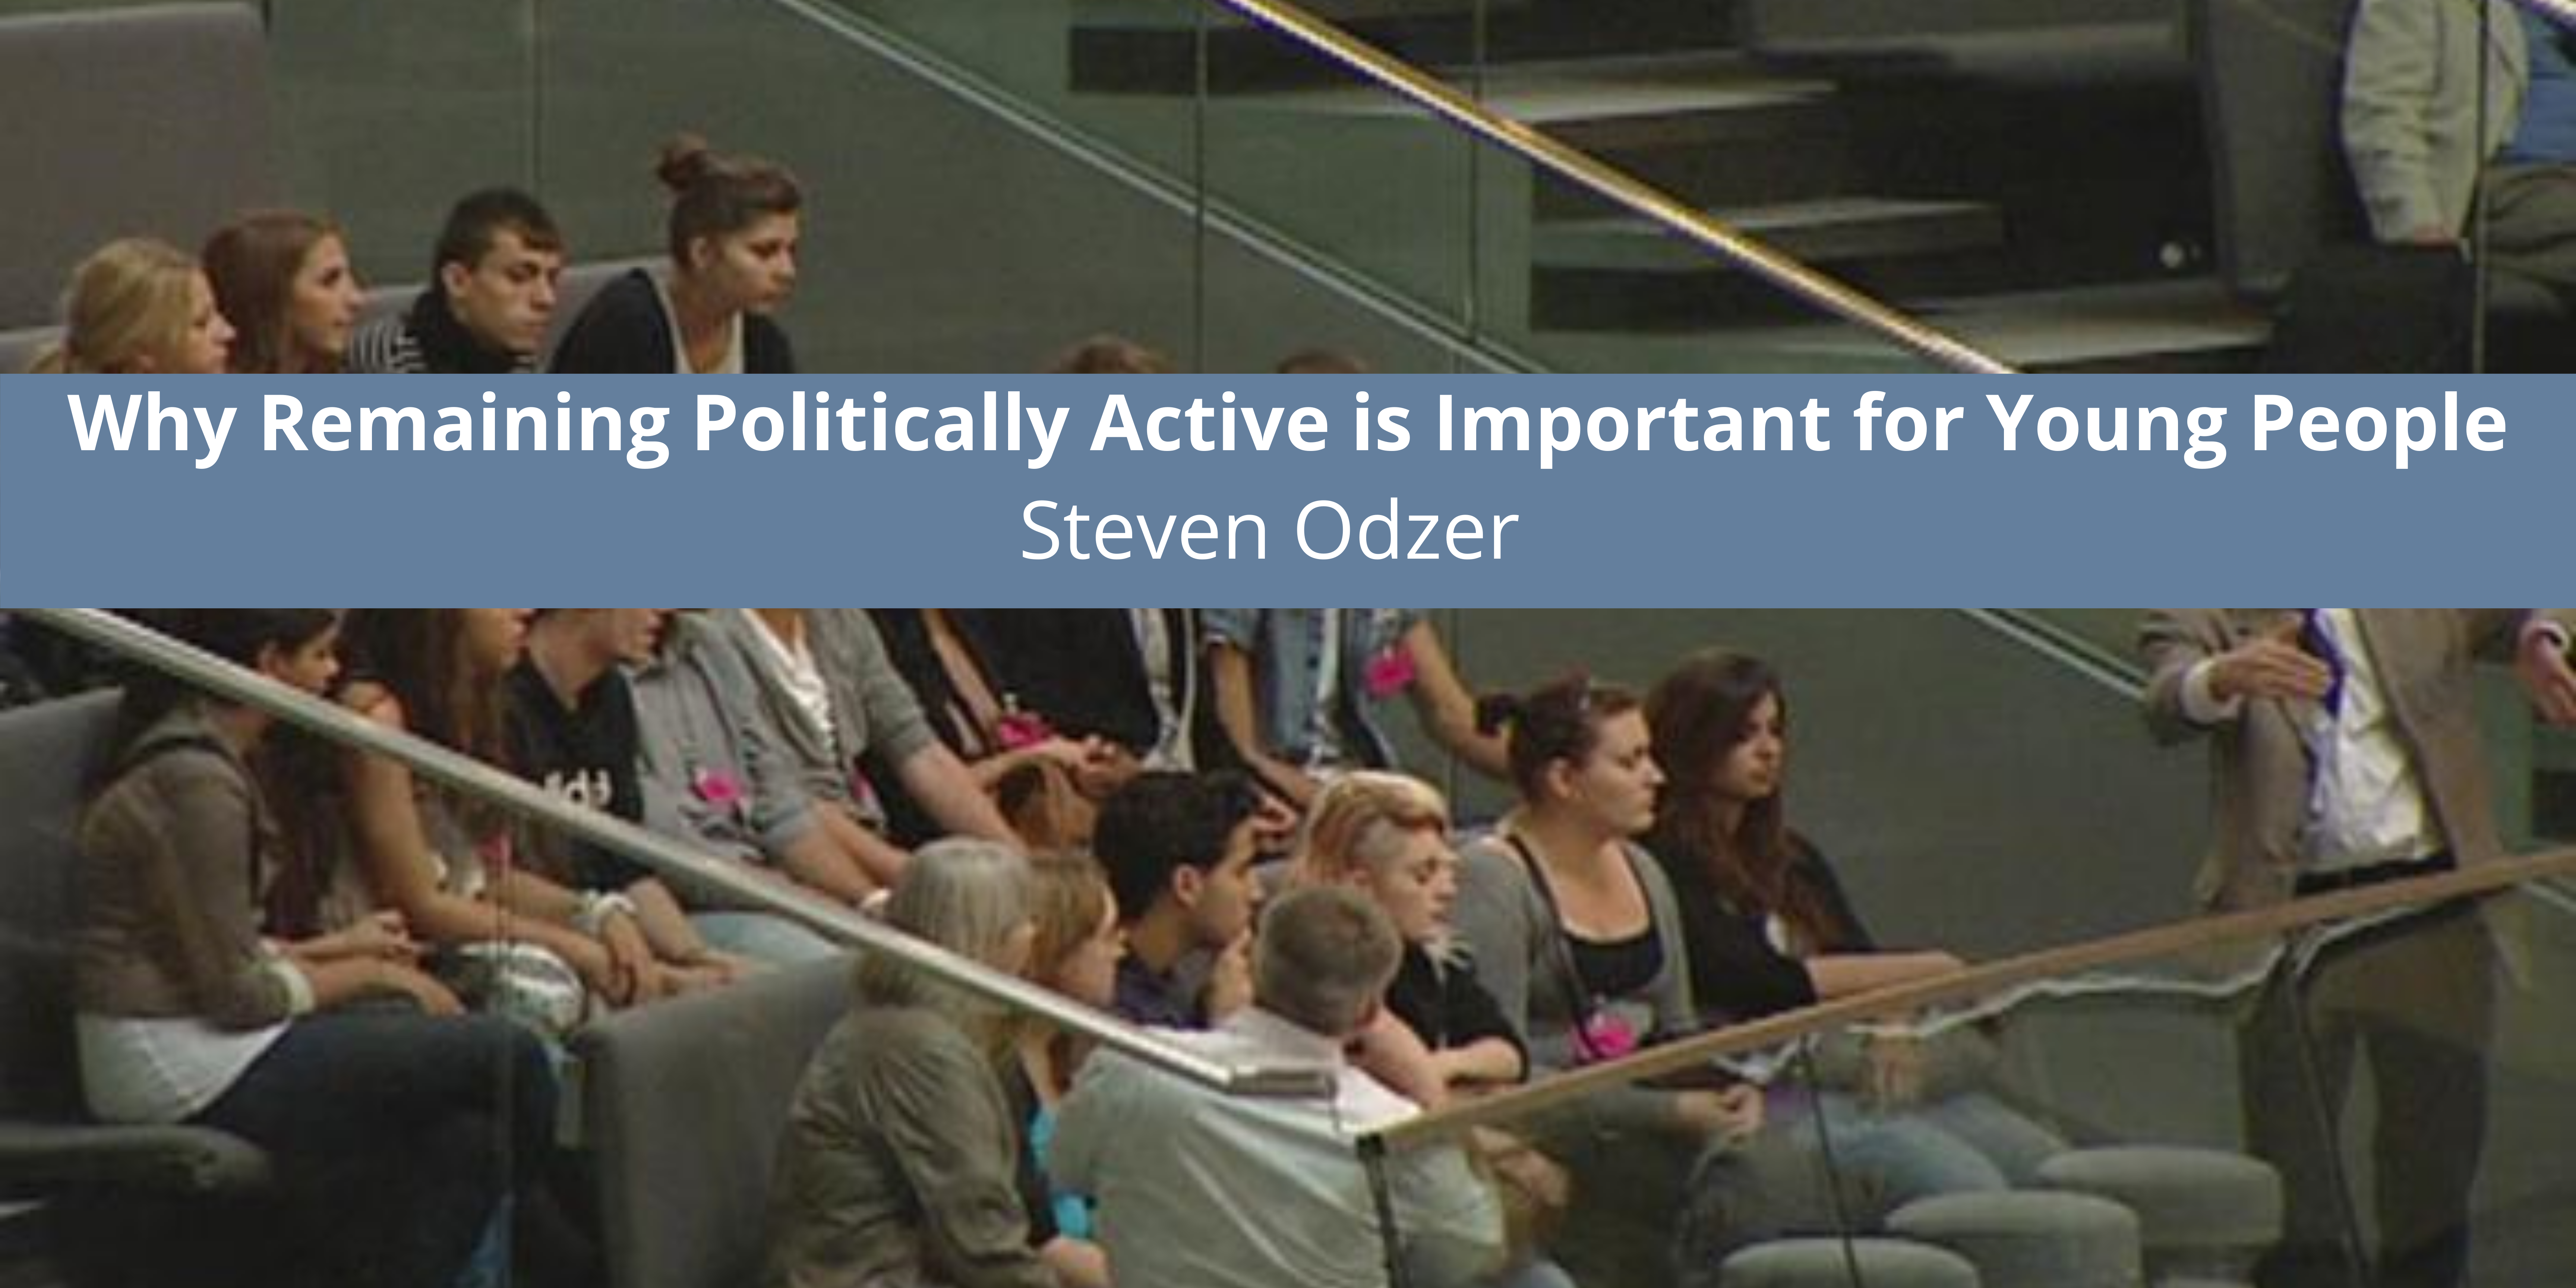 Why Remaining Politically Active is Important for Young People